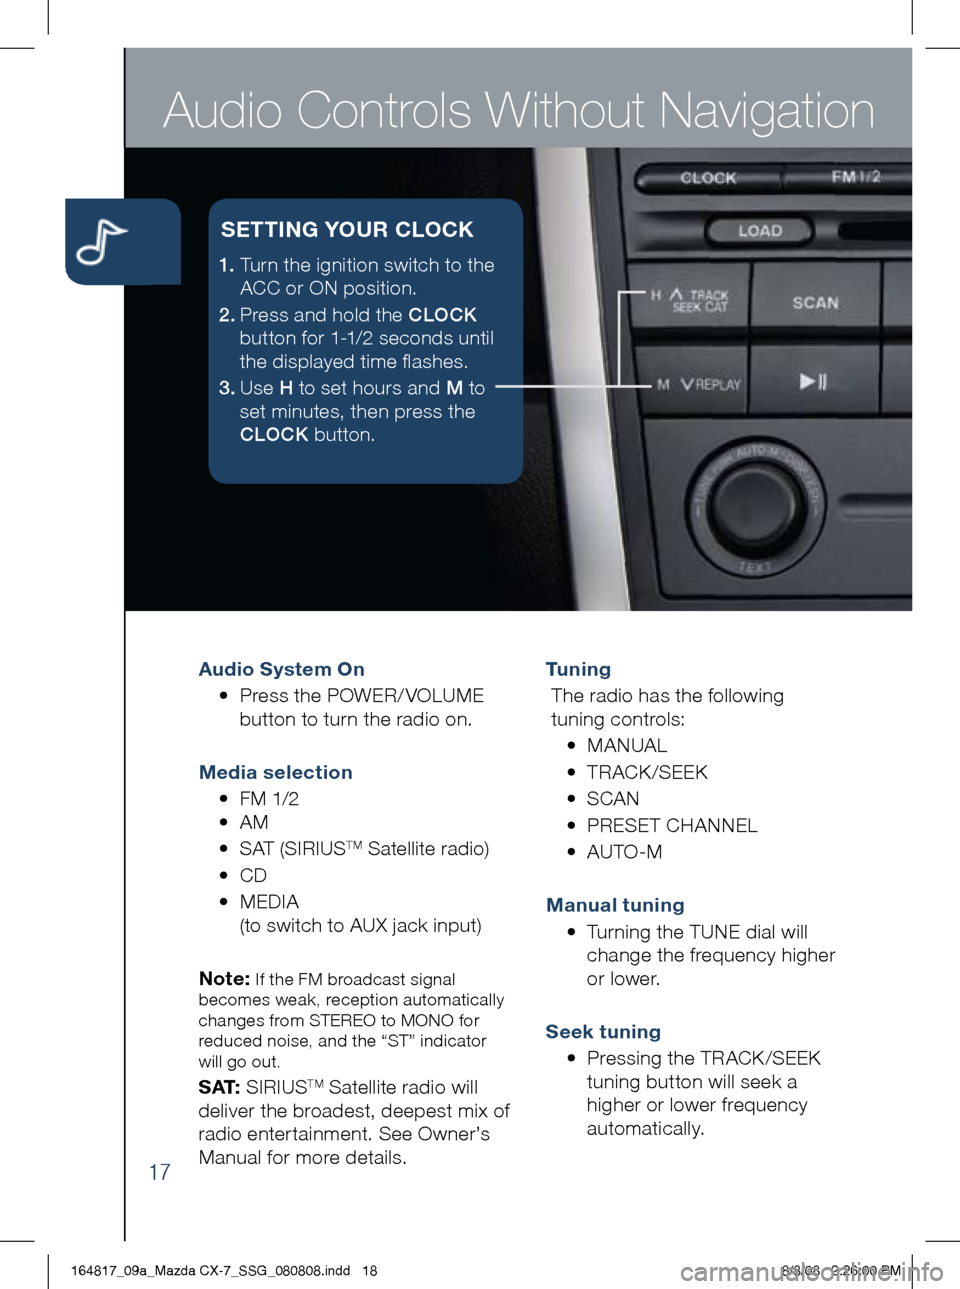 MAZDA MODEL CX-7 2009  Smart Start Guide (in English) Audio Controls Without Navigation
17
Audio System On 
	 •		 Press 	the 	POWER/ VOLUME	
button	to	turn	the	radio	on. 	
m edia selection 
  •	FM	1/2  
  •	AM
  •	SAT	(SIRIUS
TM	Satellite	radio)
